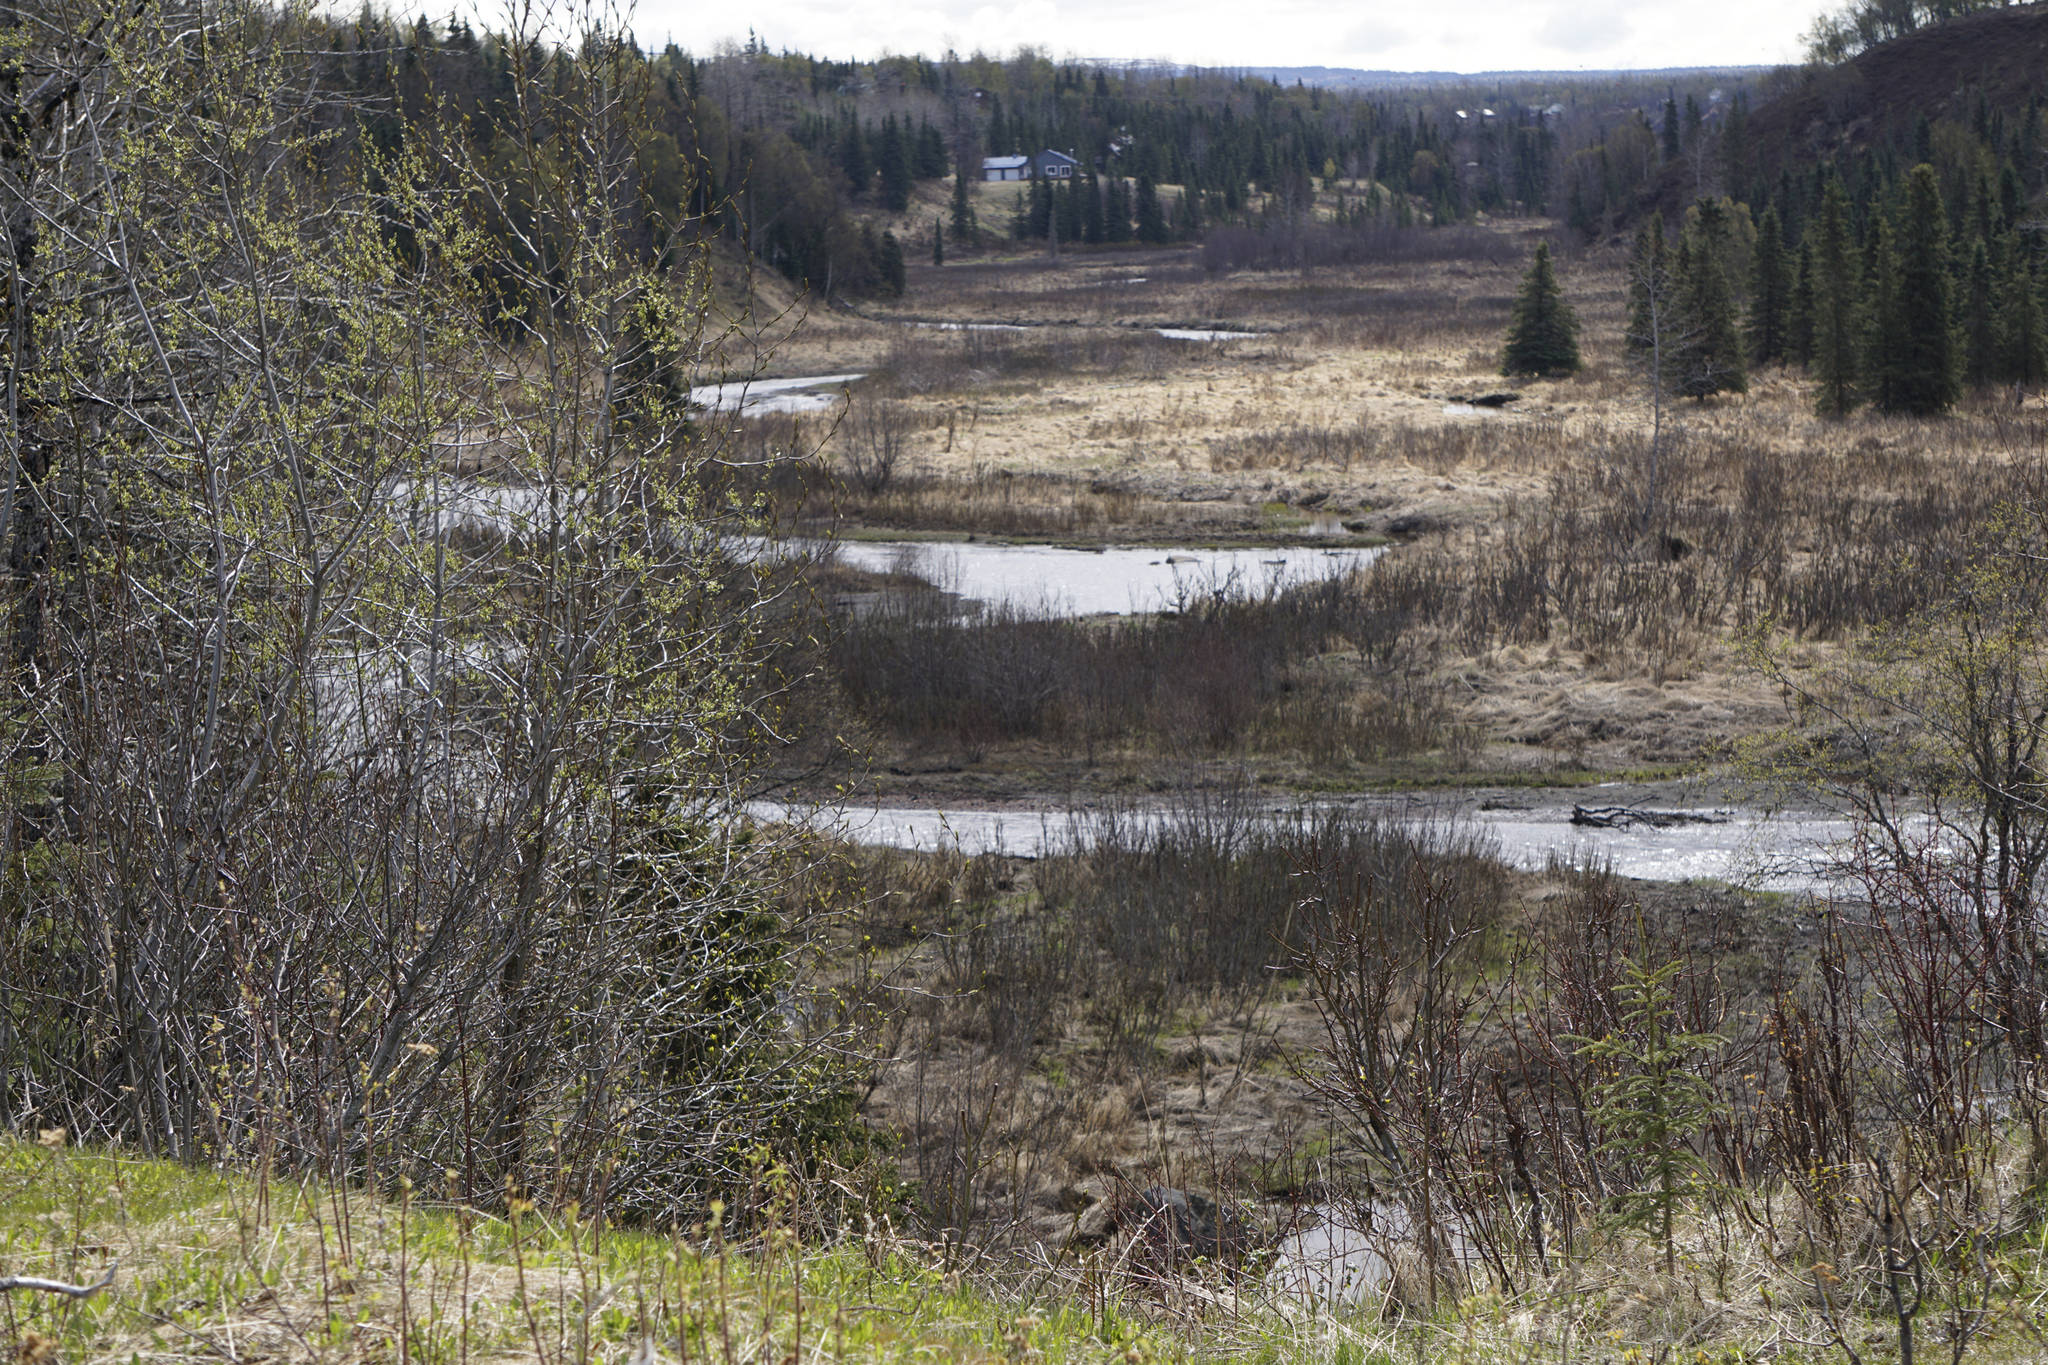 The Ninilchik River on May 18, 2019, in Ninilchik, Alaska. (Photo by Michael Armstrong/Homer News)